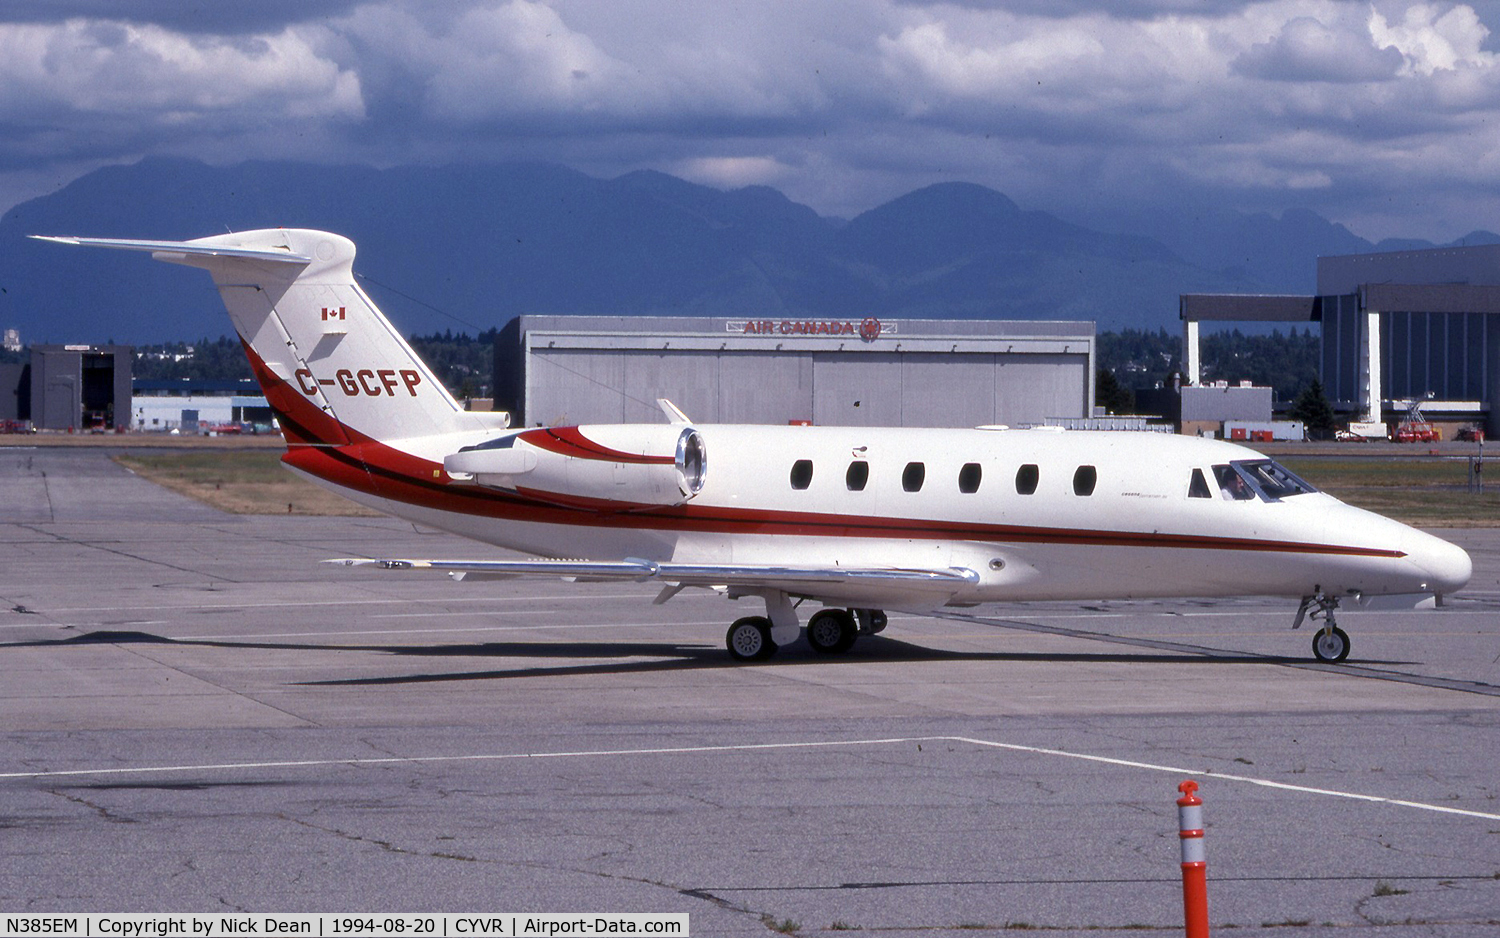 N385EM, 1987 Cessna 650 Citation C/N 650-0145, CYVR (Seen here as C-GCFP this airframe was subsequently registered N385EM as posted and was W/O when it crashed and broke up in a field at Caico Seco Venezuela en route Valencia & Puerto Ordaz 18th Feb 2008)